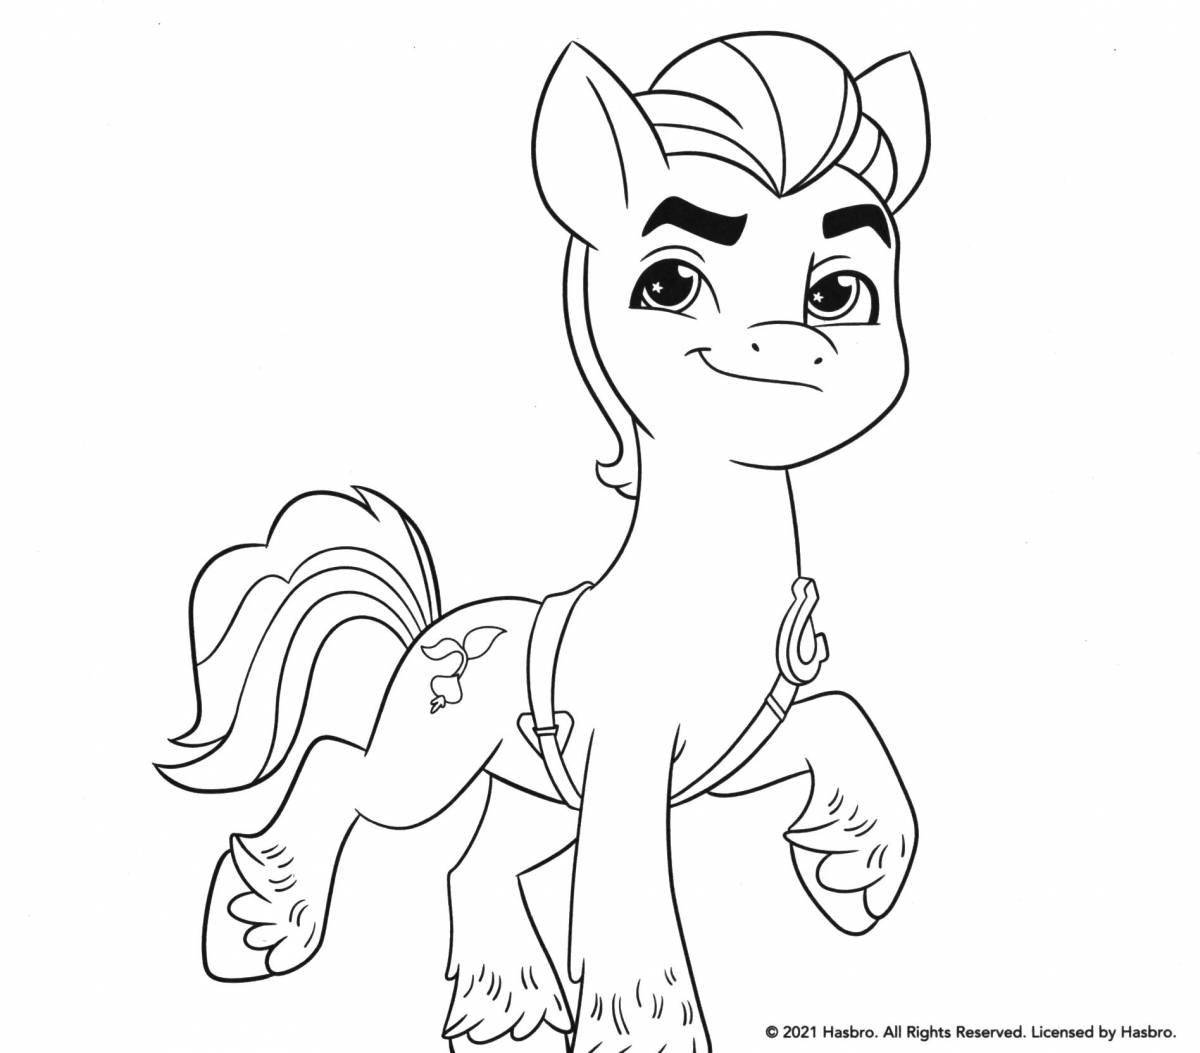 Pure Storm Pony coloring page